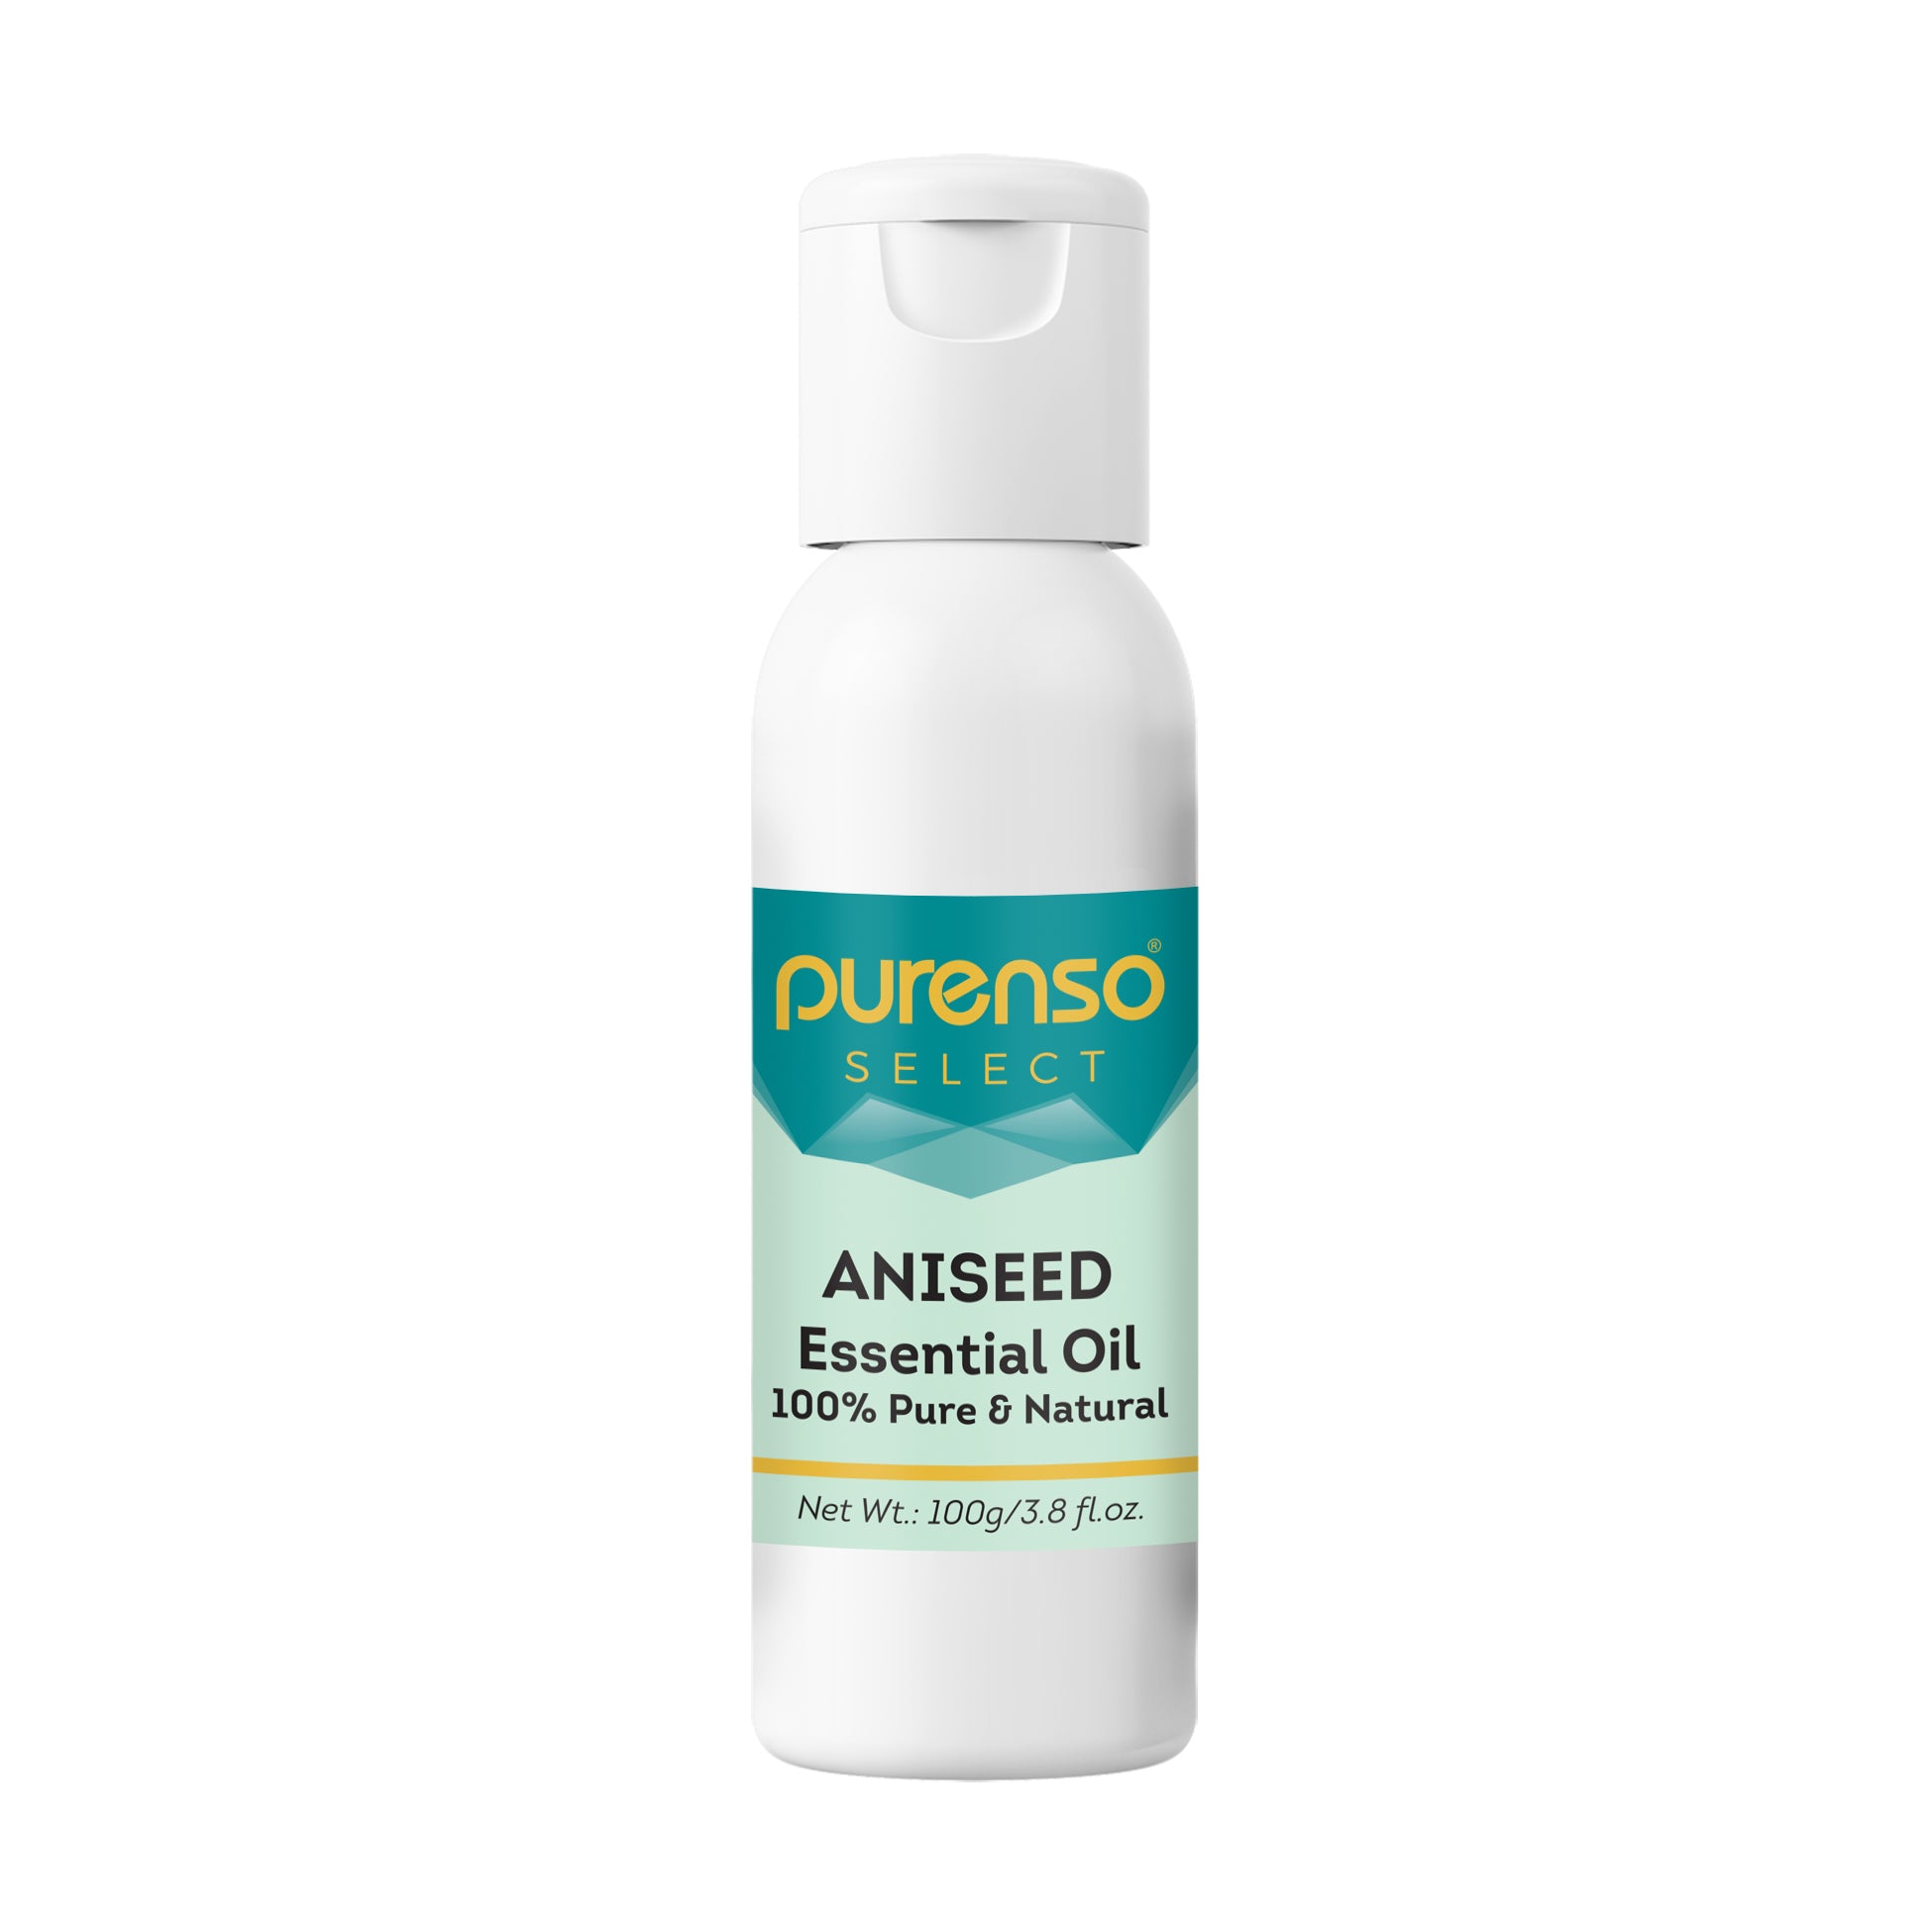 Aniseed (Anise) Essential Oil